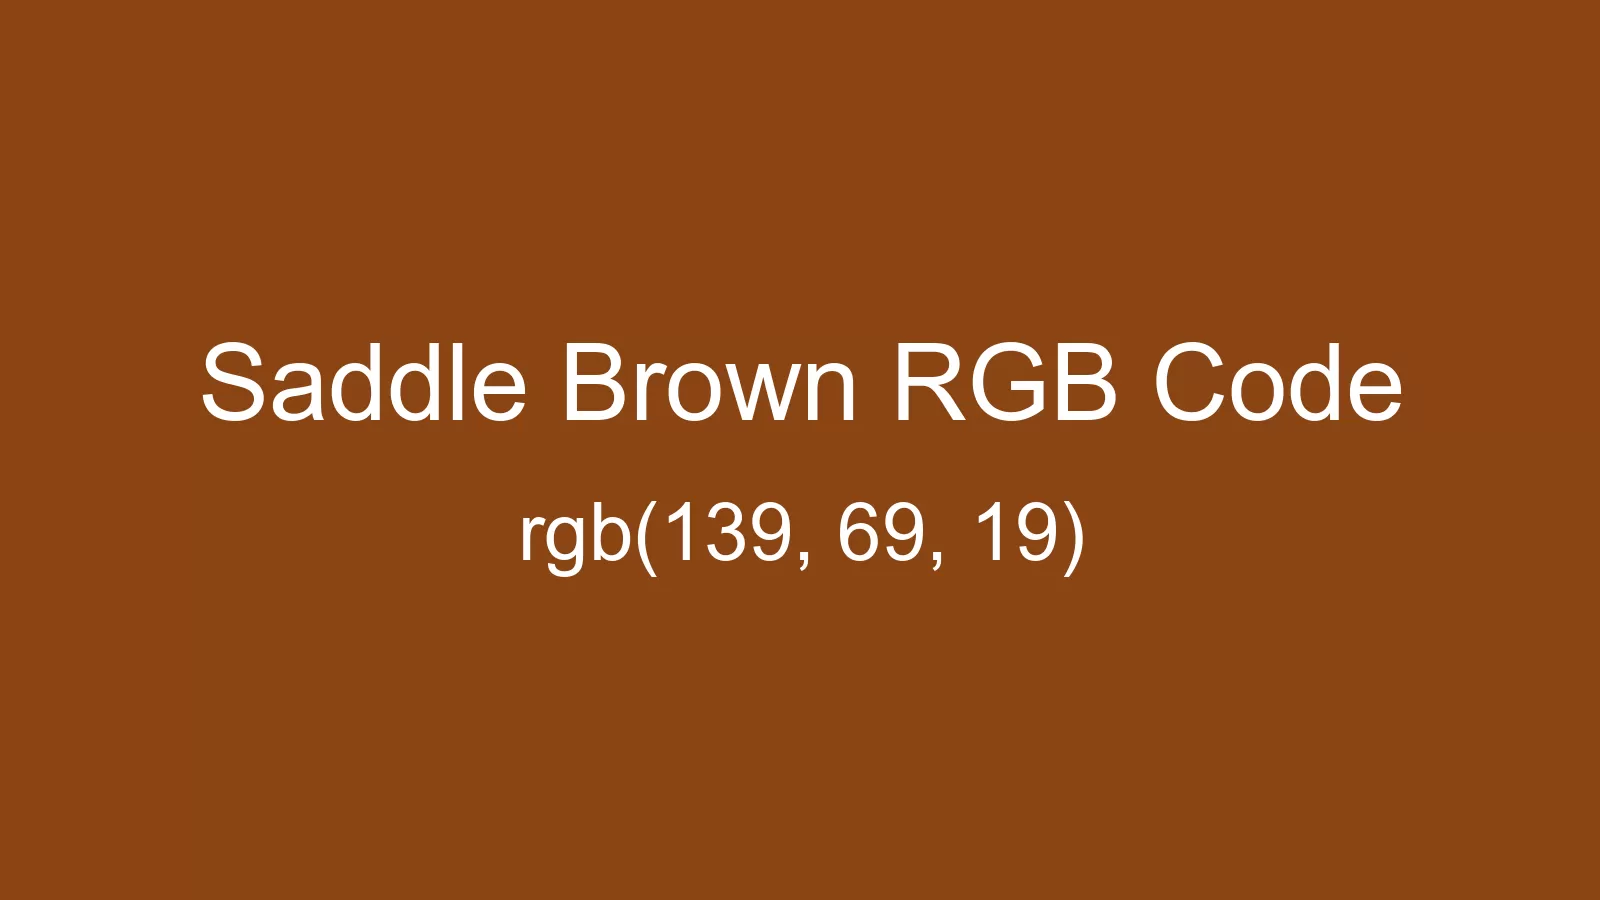 preview image of Saddle Brown color and RGB code